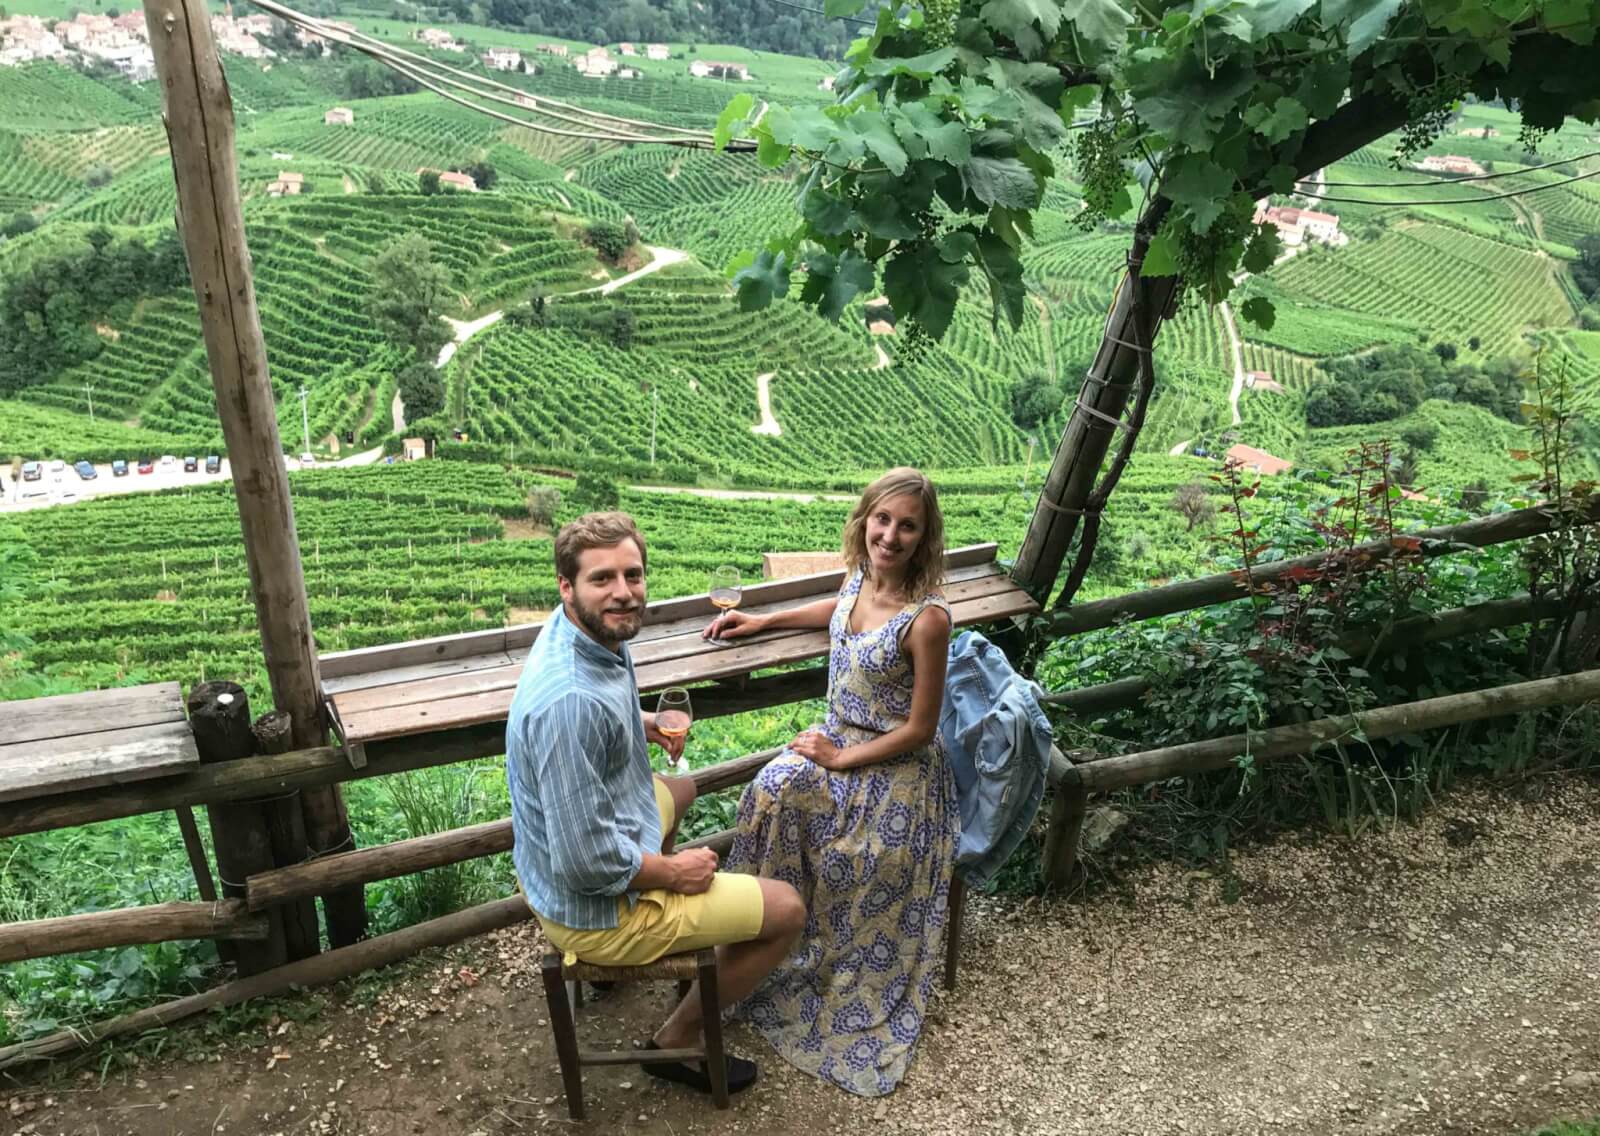 Hayley and Enrico enjoying a prosecco overlooking the vines in Valdobbiadene